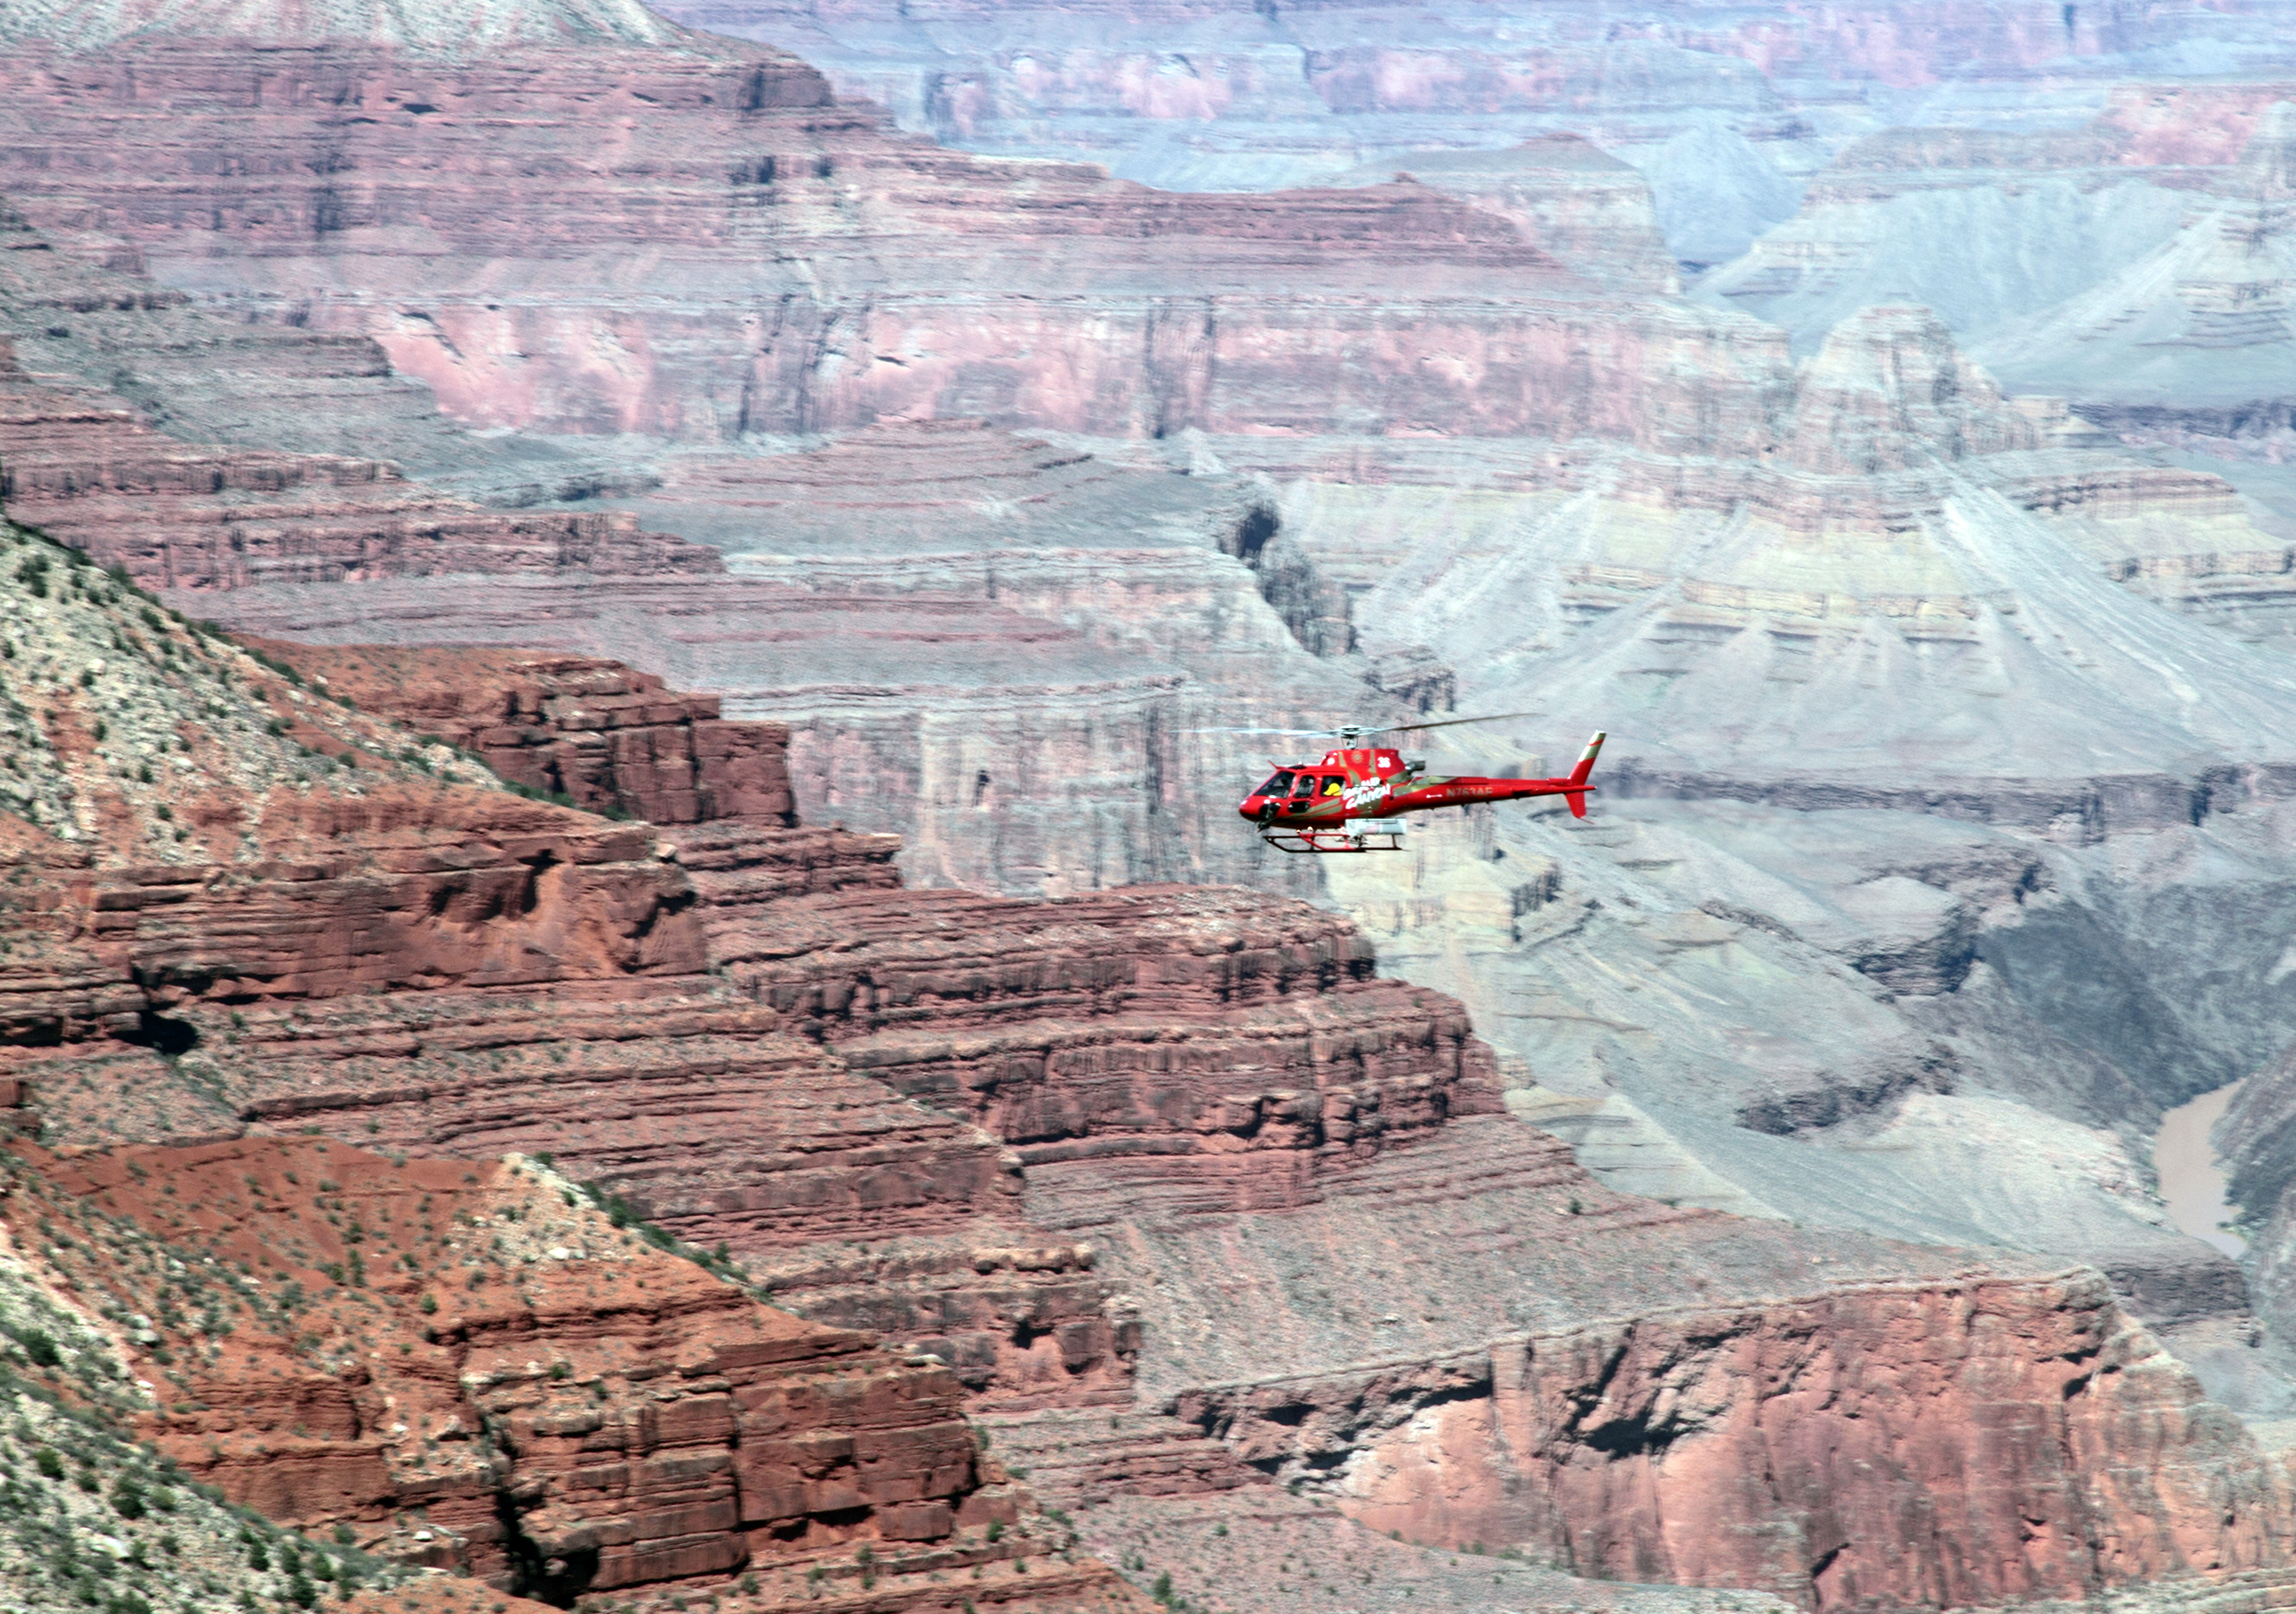 Helikoptertur over Grand Canyon